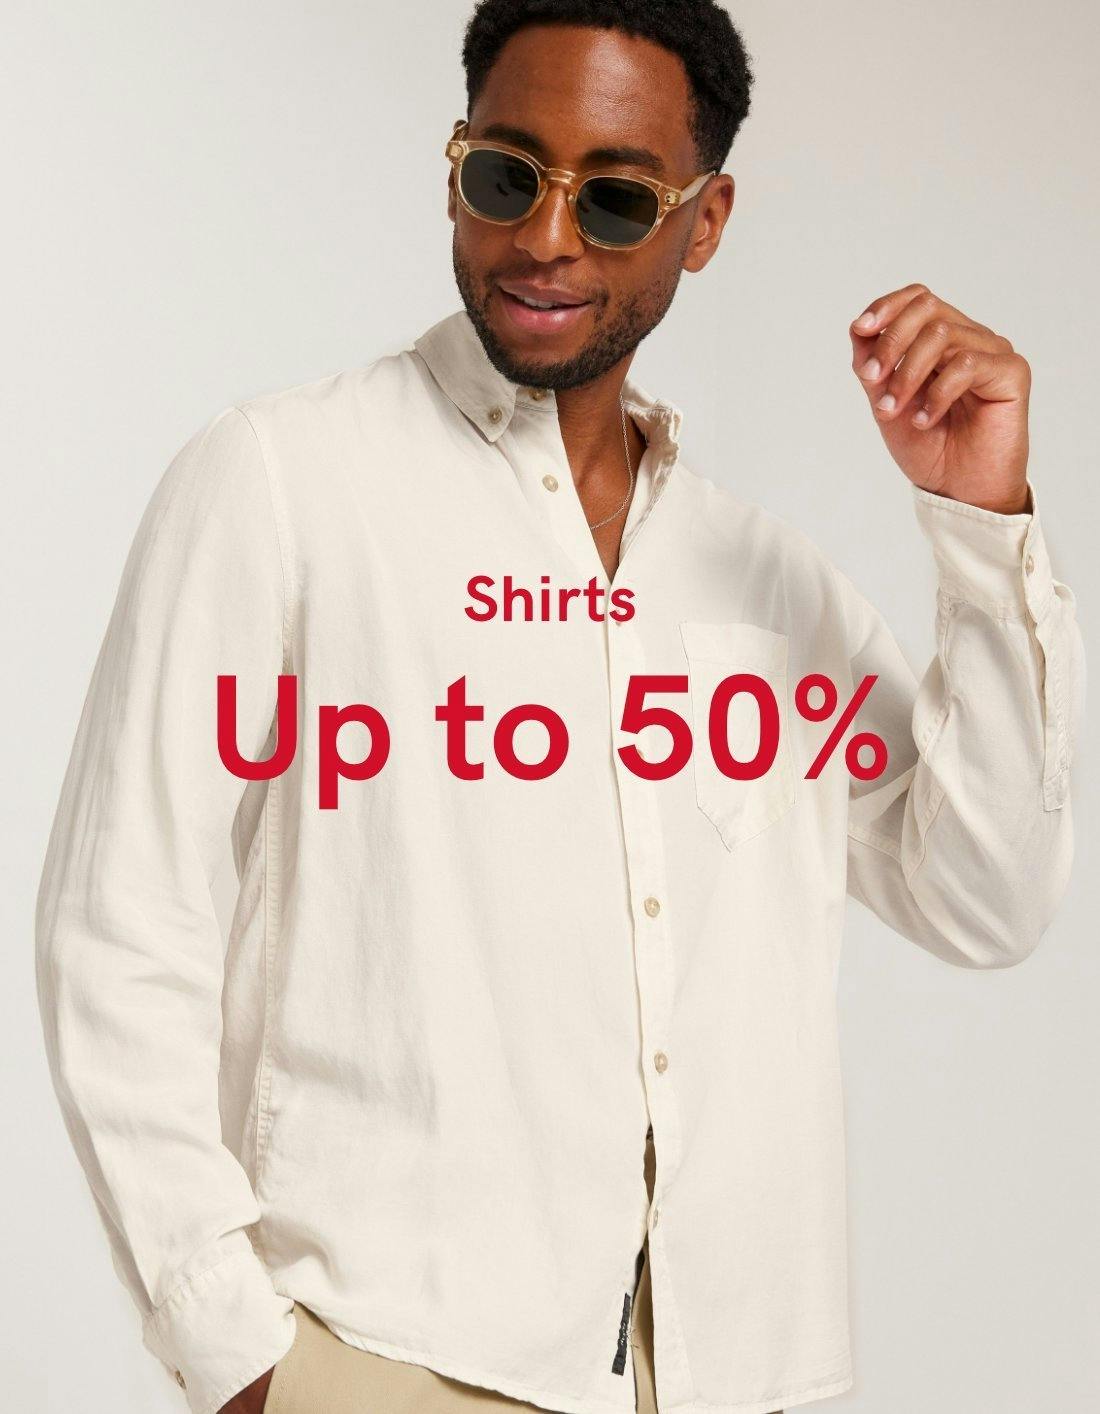 Deal on shirts